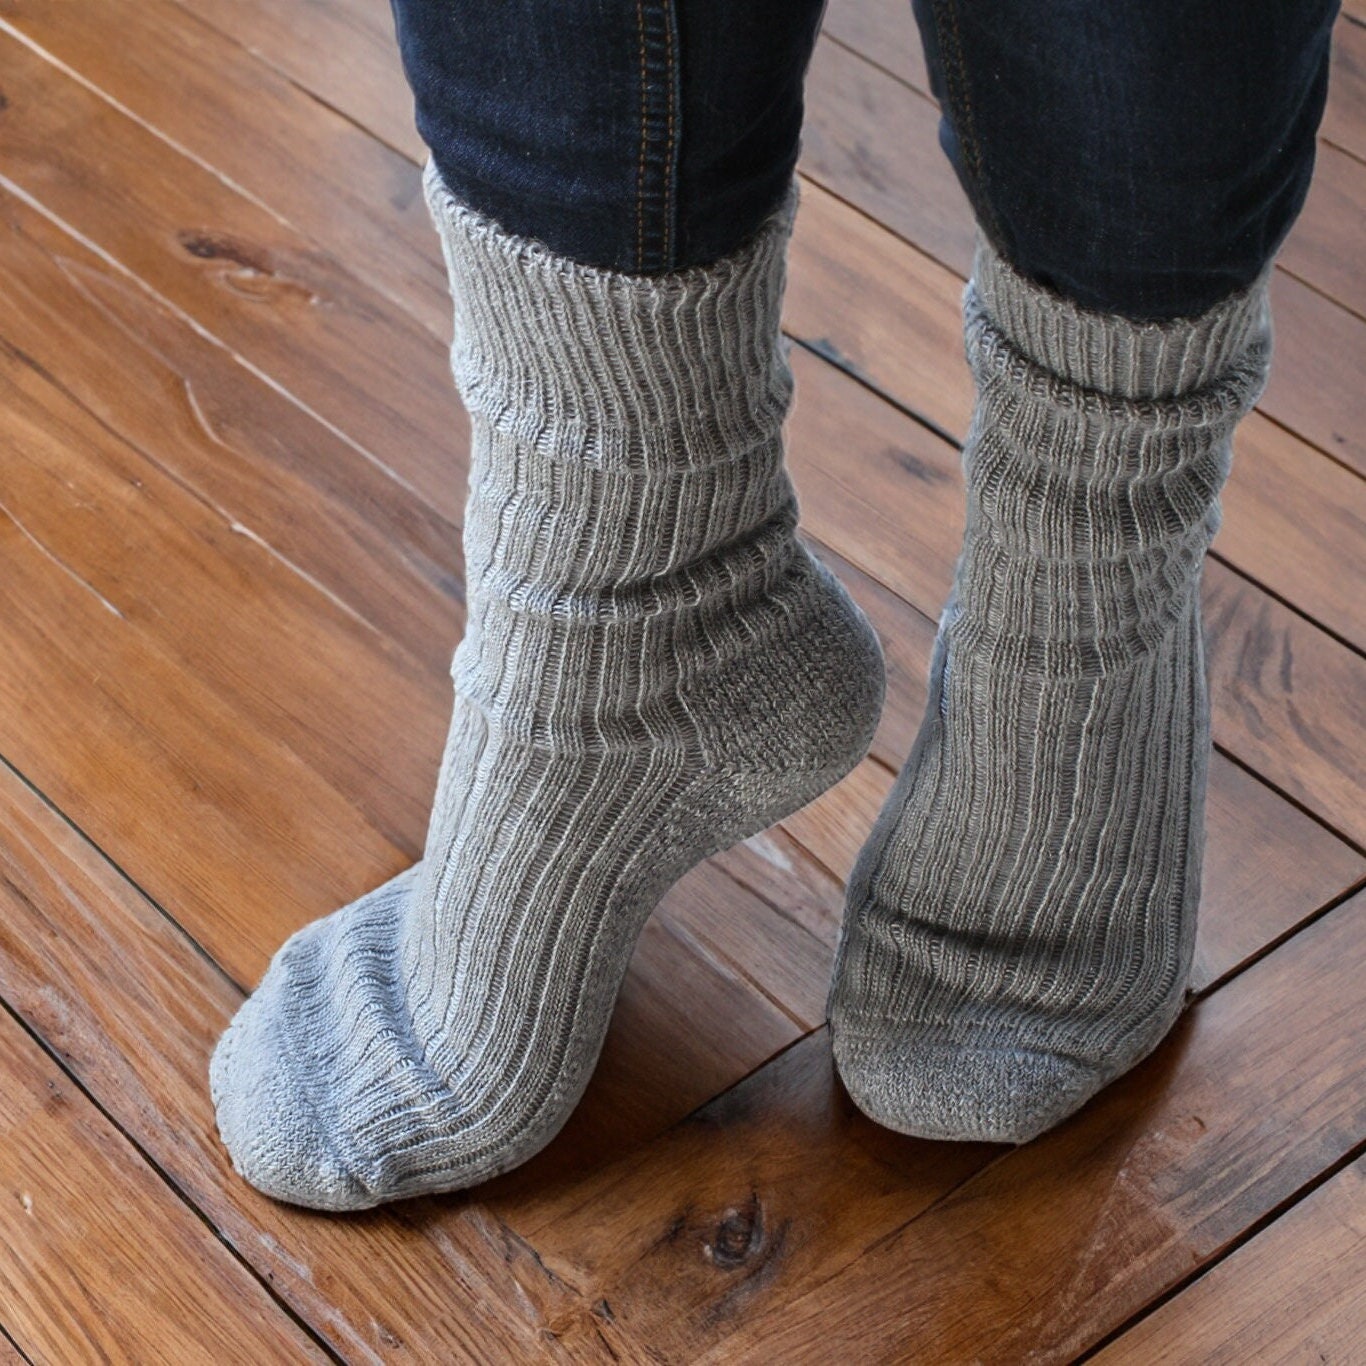 Mohair Short Walking Socks With a Rib Pattern Foot and a Comfy